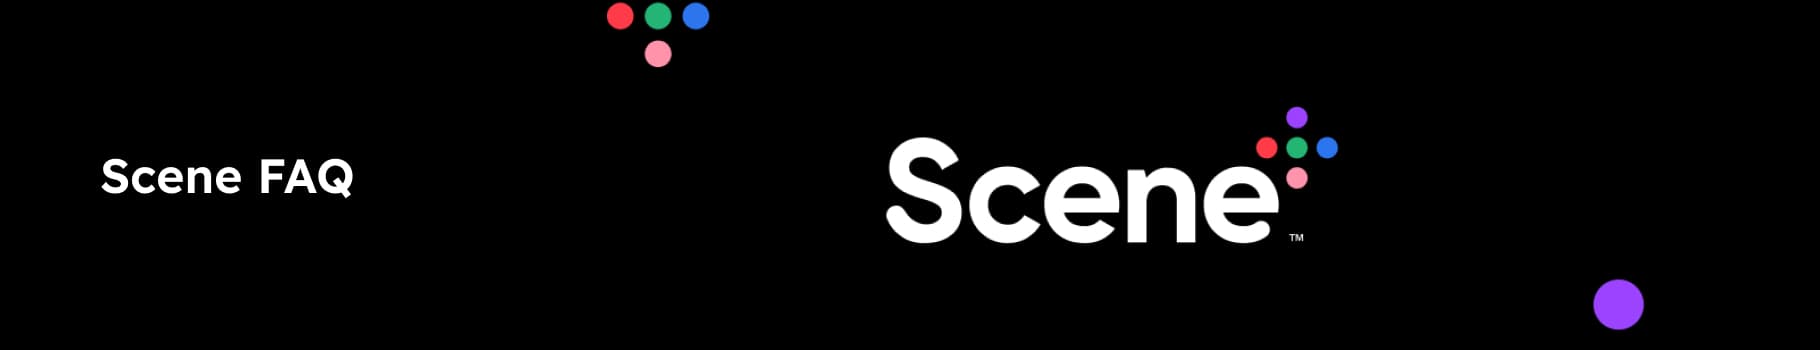 In this image, the logos of Scene FAQ and Scene+ are featured.